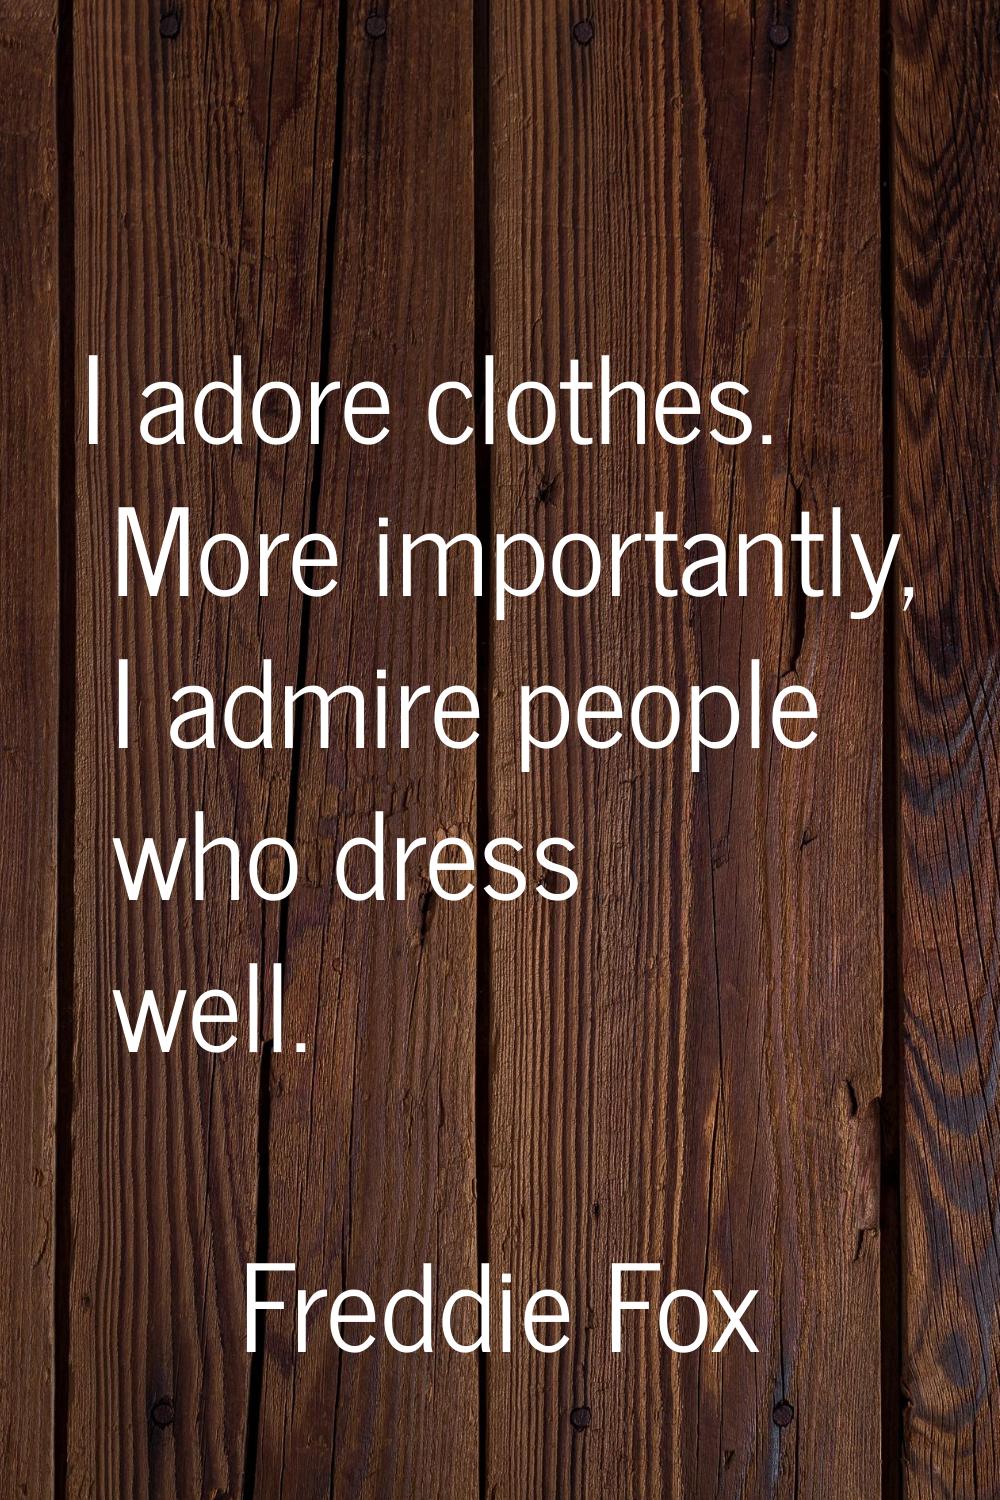 I adore clothes. More importantly, I admire people who dress well.